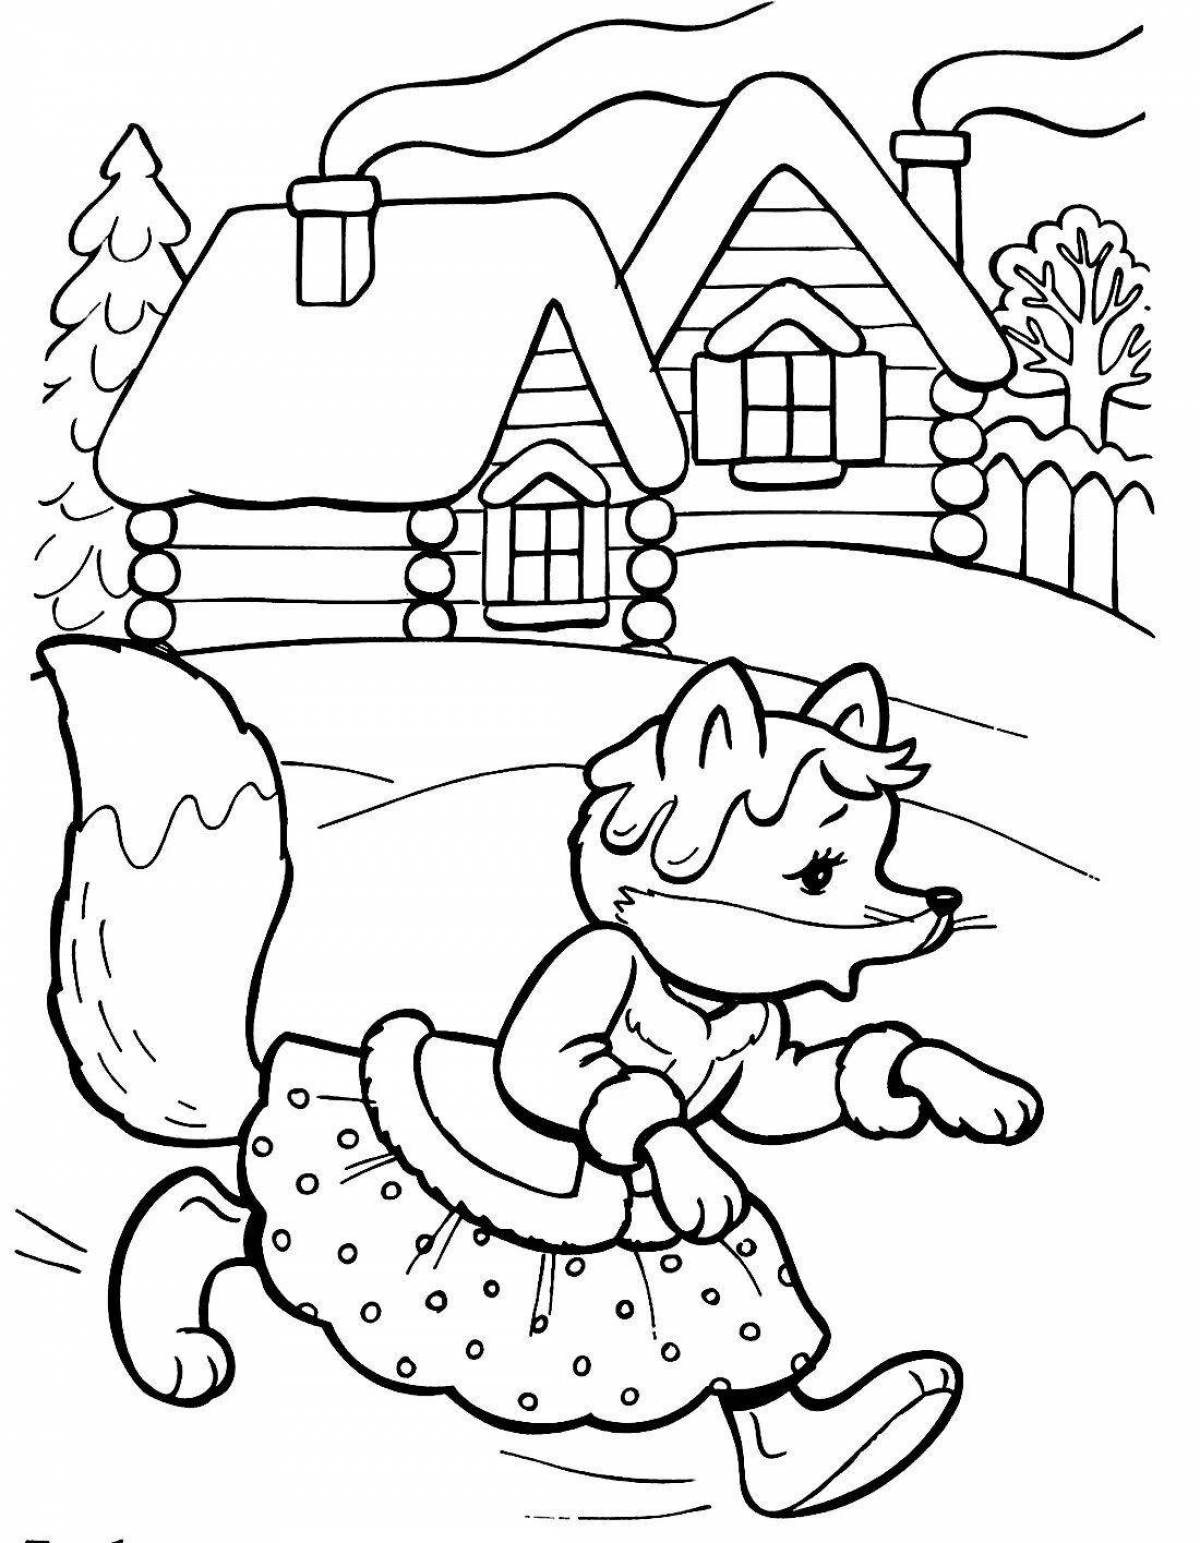 Sweet winter hut coloring pages for kids